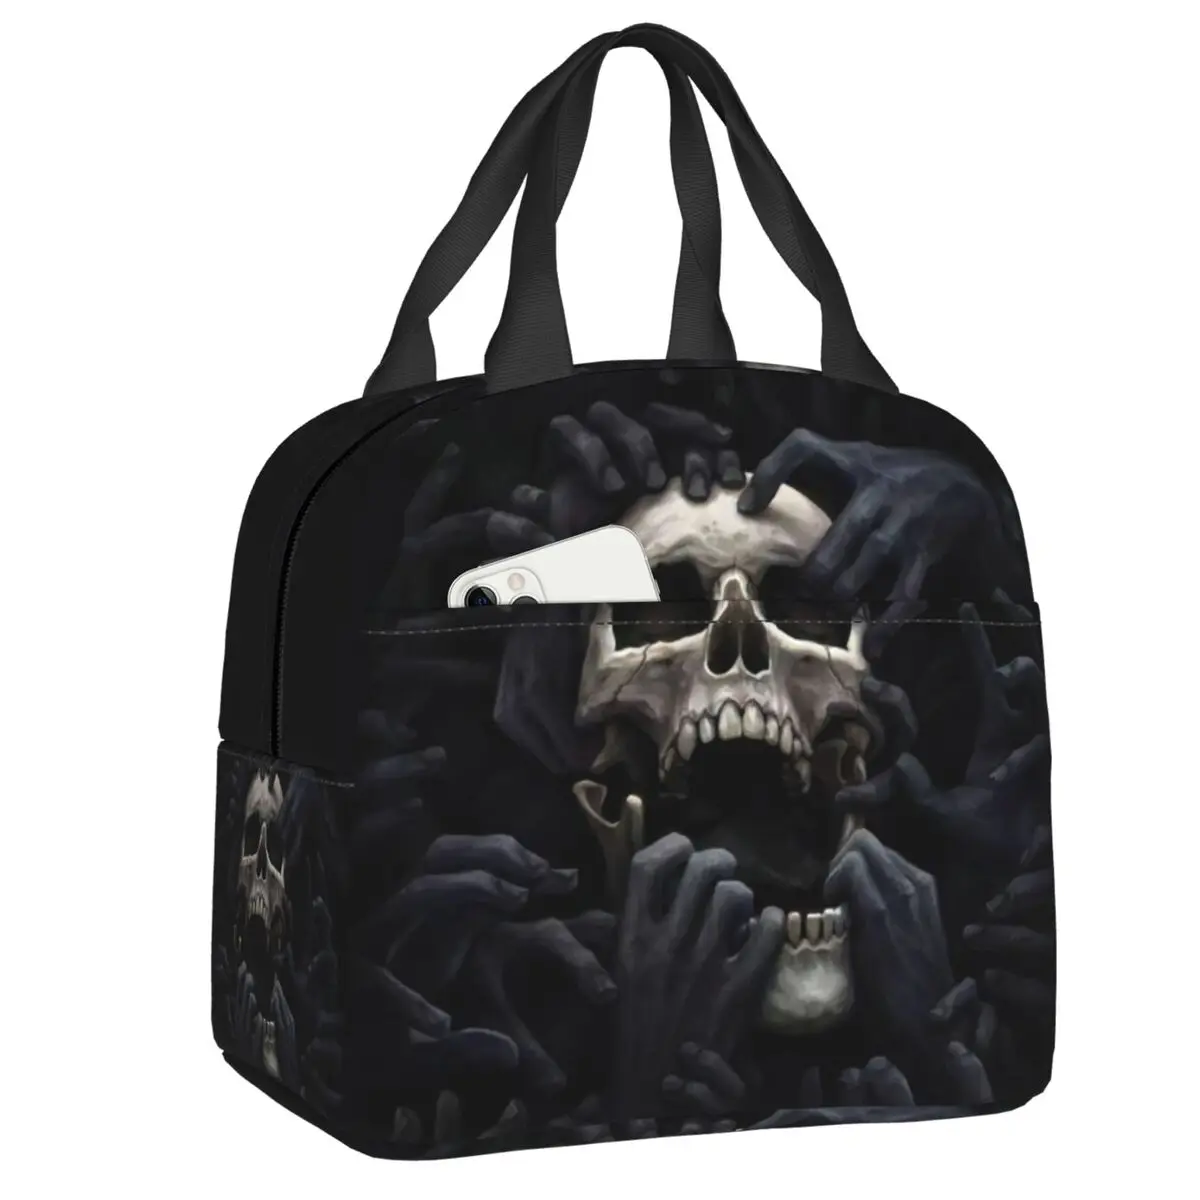 

Evil Hands Skull Lunch Bag Leakproof Halloween Gothic Skeleton Thermal Cooler Insulated Lunch Box For Women Kids Food Tote Bags